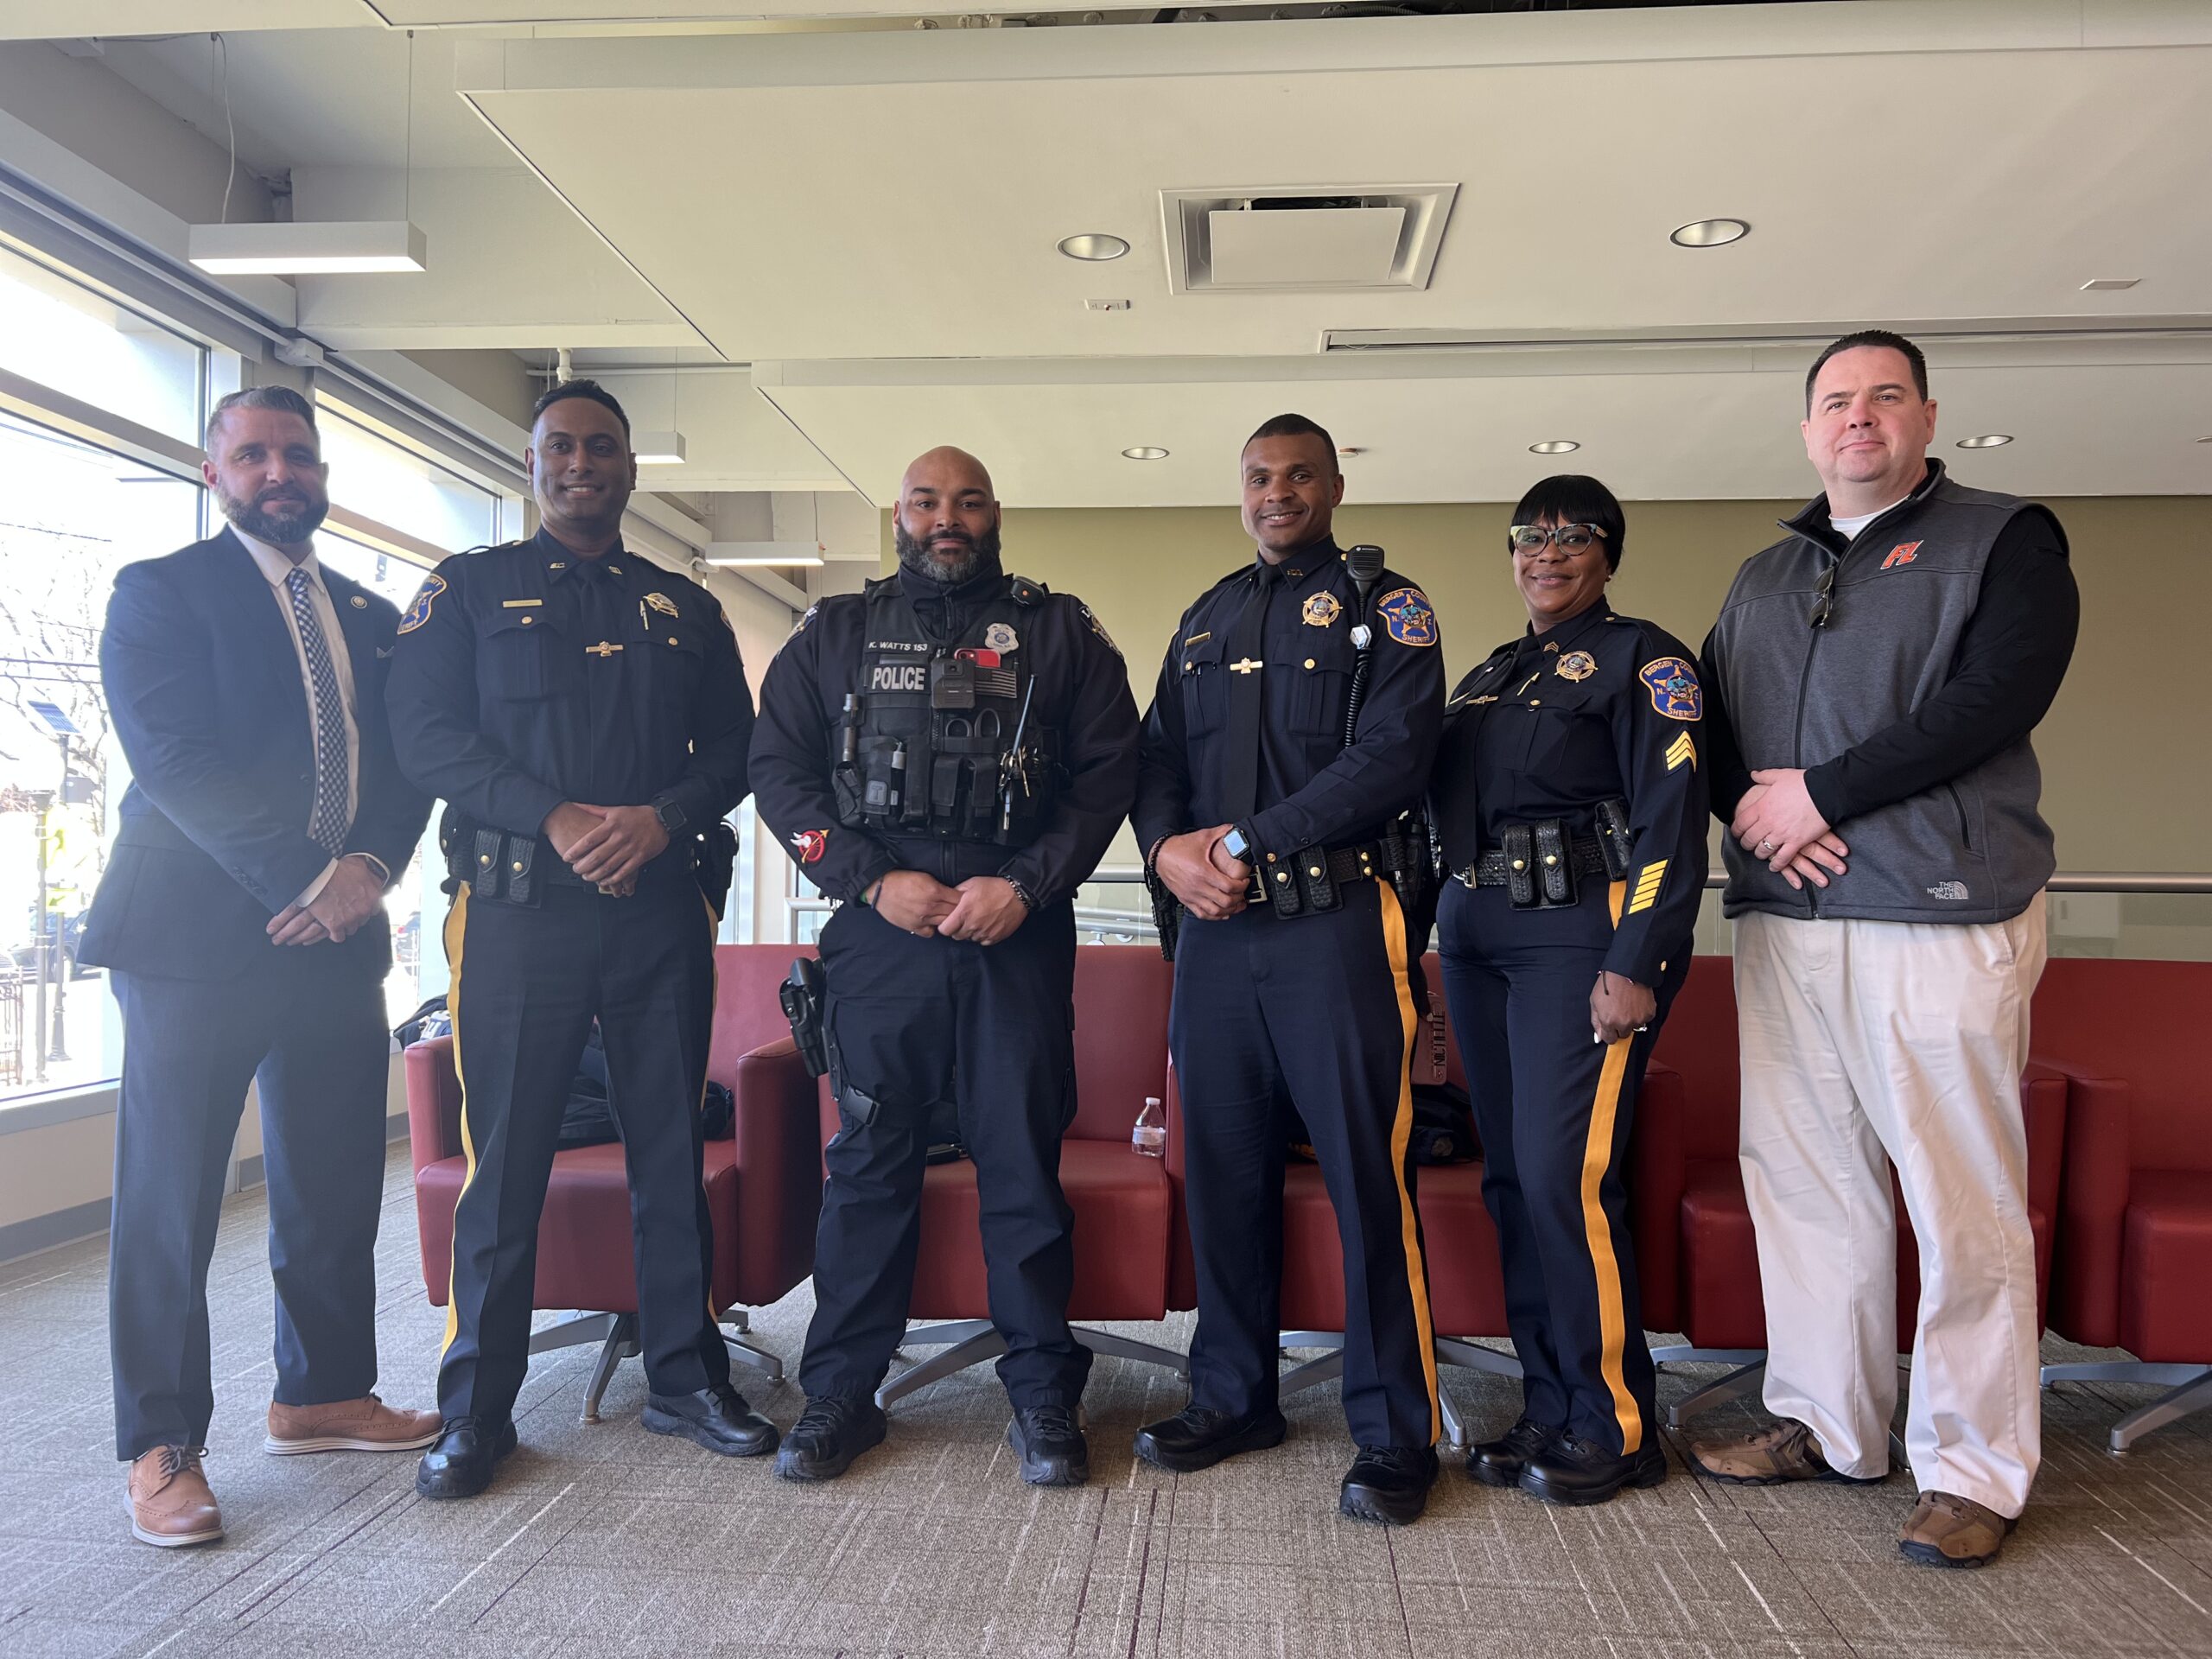 Left to right: Lt. Kelly Krenn (BCPO), Officer Litty Thomas (BCSO), Officer Keith Watts (Lodi PD), Officer Ken Charlenea (BCSO), Sergeant Nichelle Ponder (BCSO), and Captain Ed Young (Fort Lee PD)